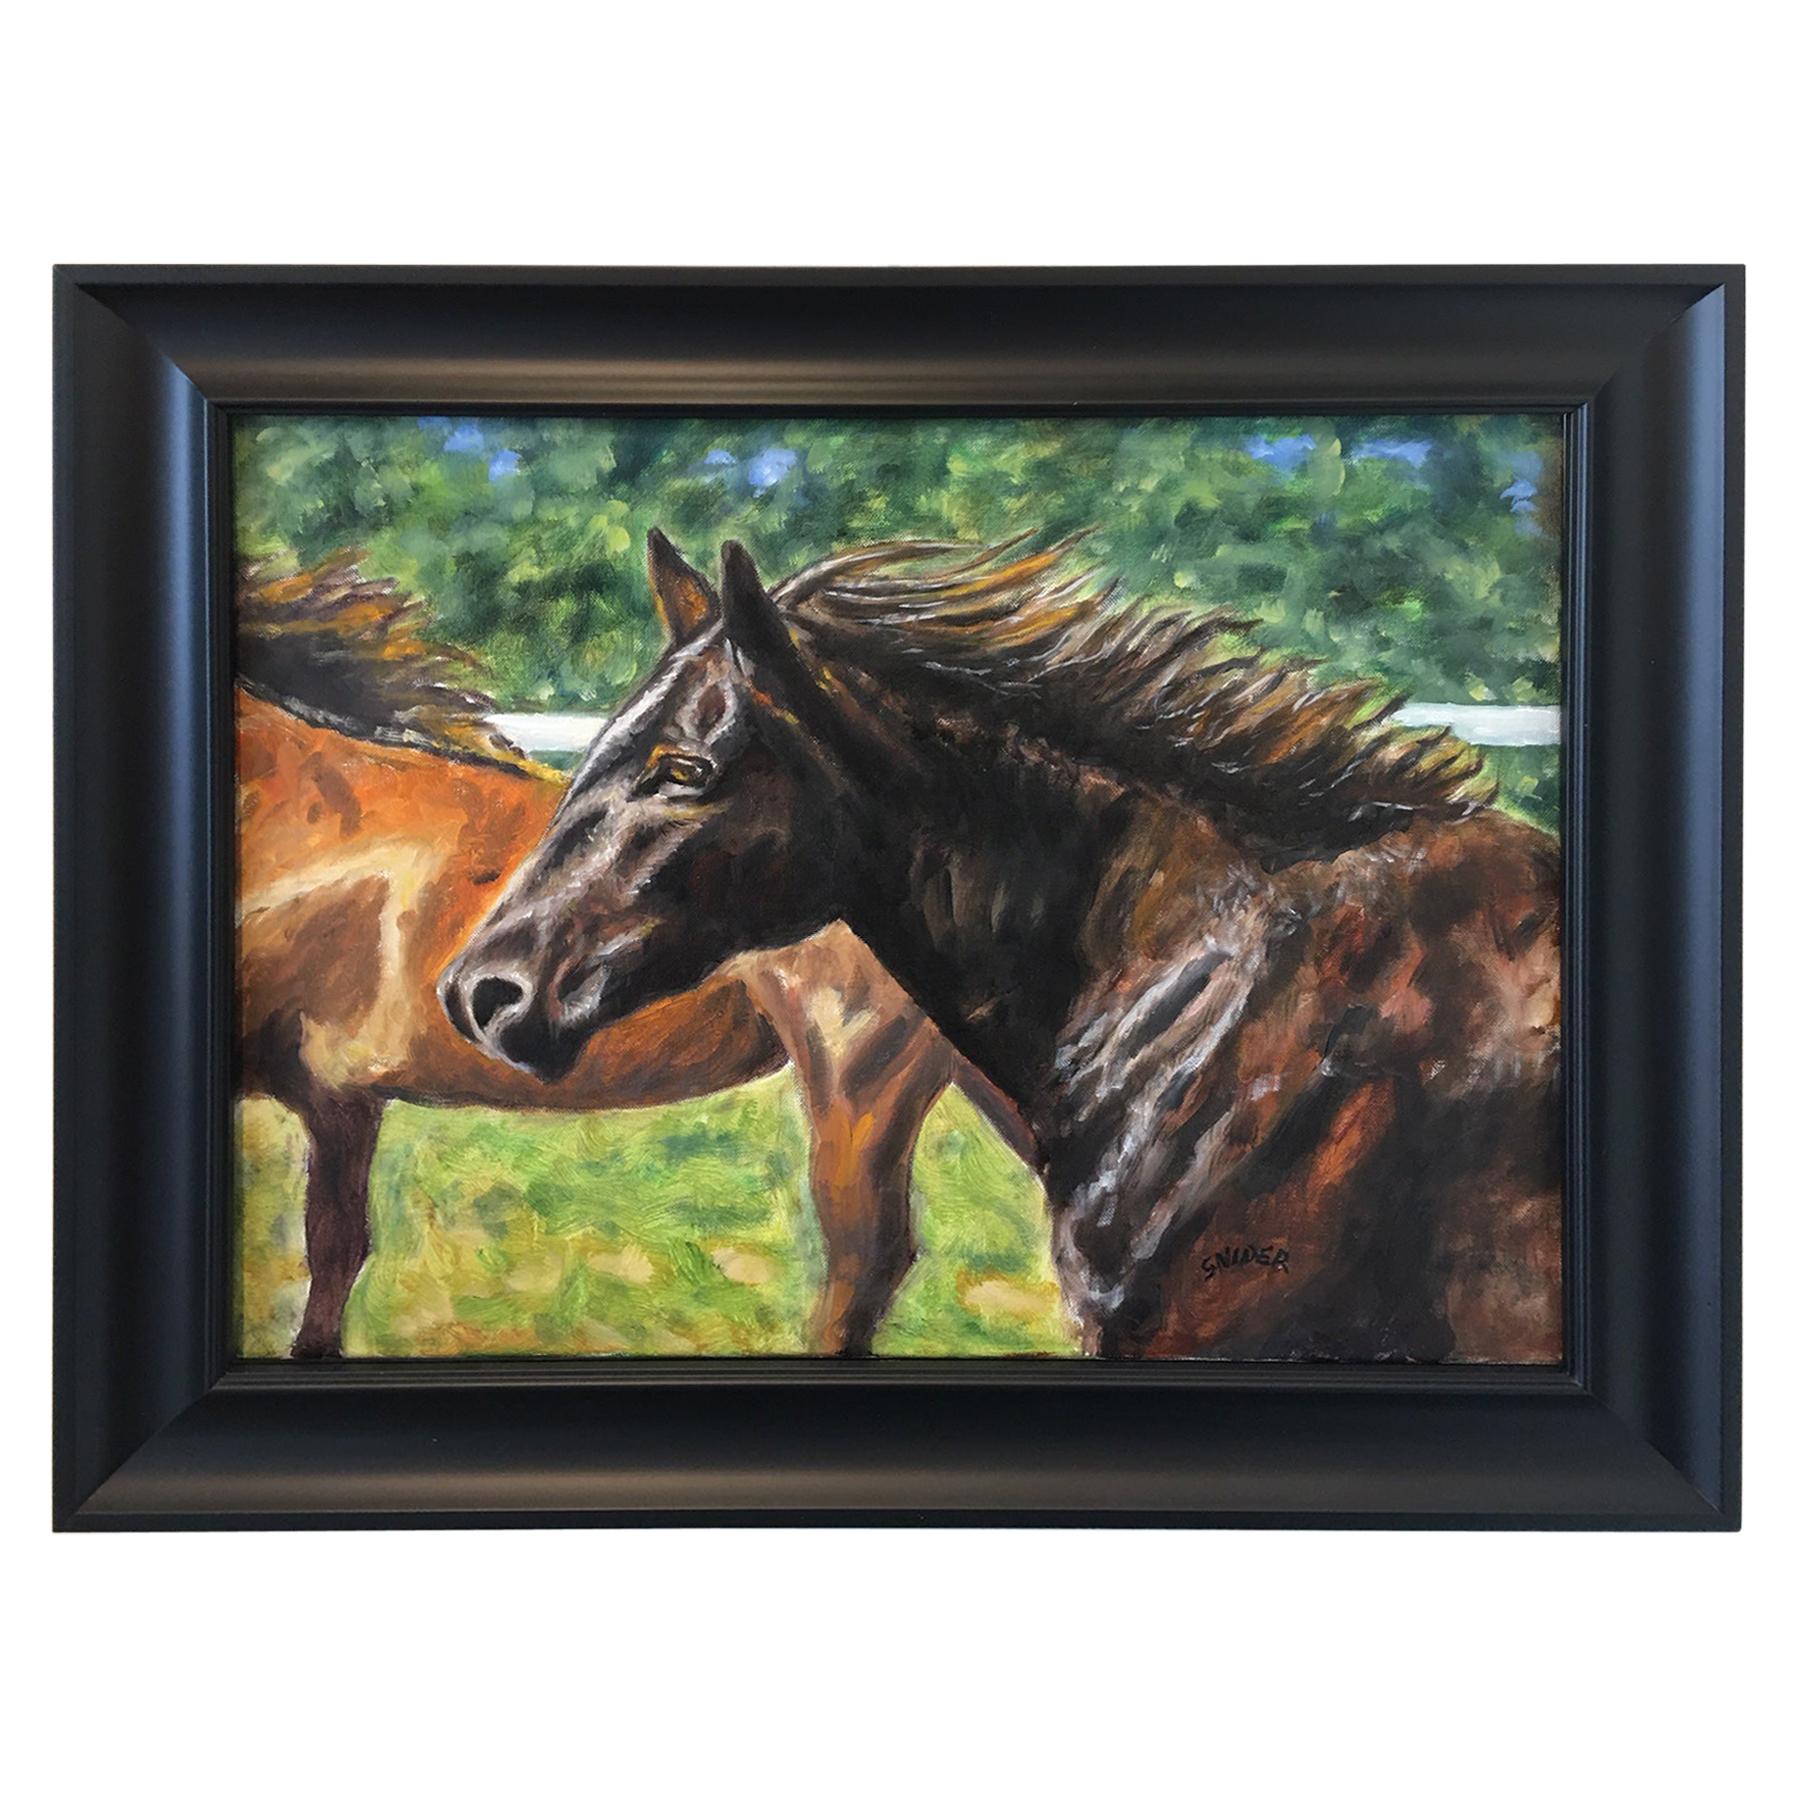 Oil on Canvas Painting "Running Horses", Lawrence Snider, circa 2017